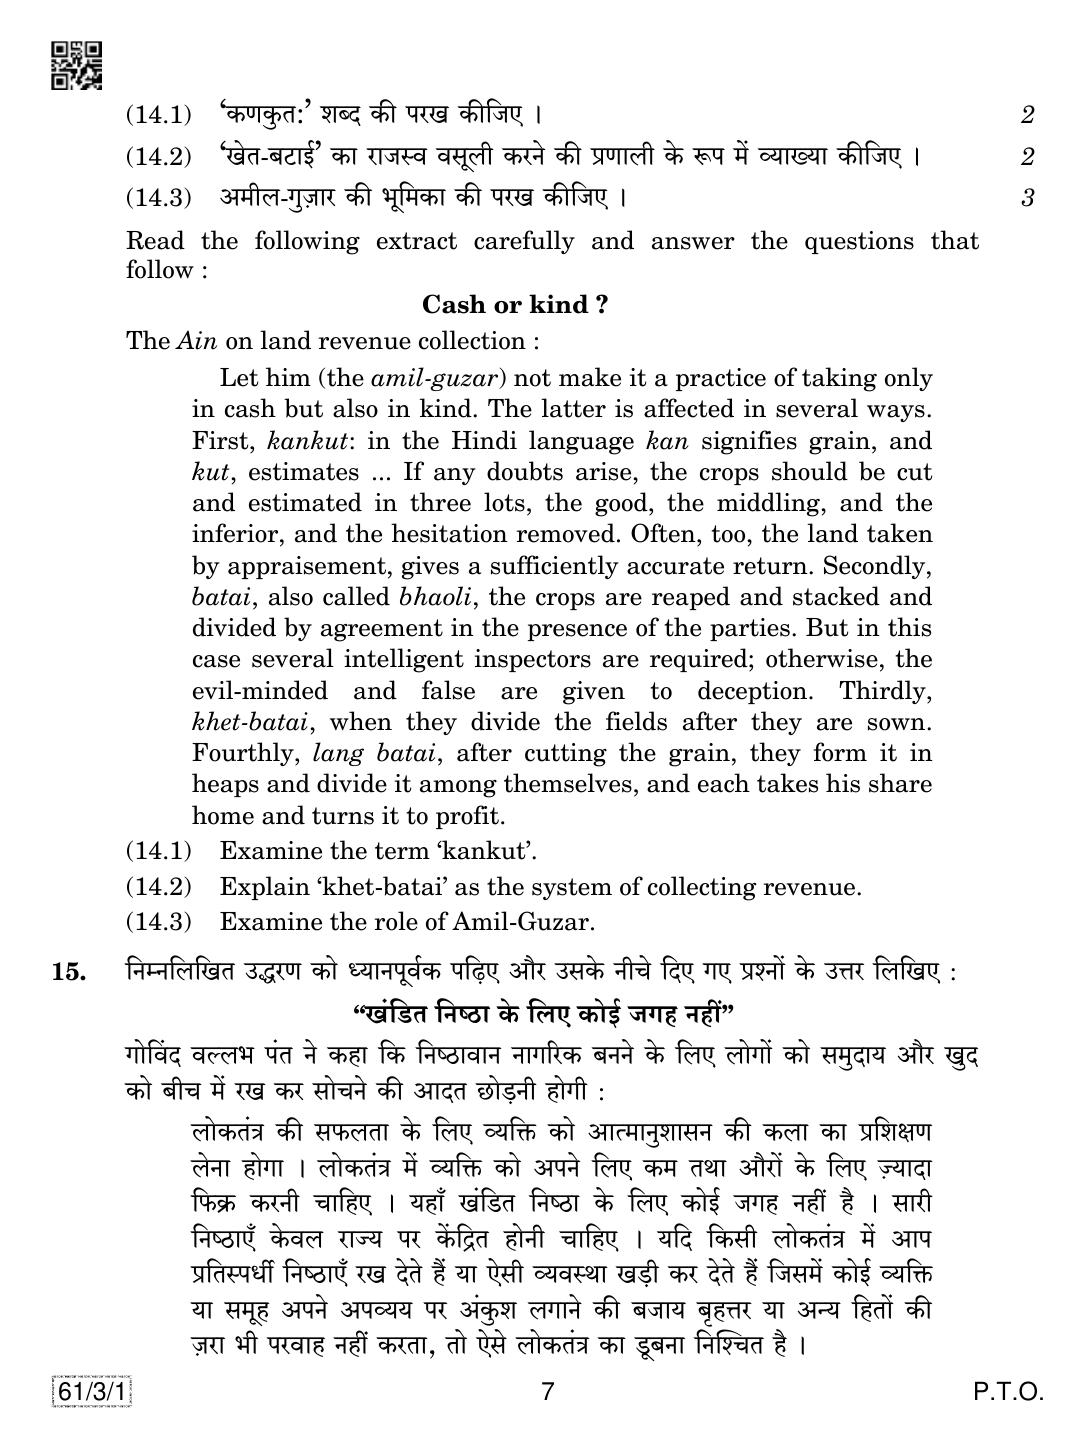 CBSE Class 12 61-3-1 History 2019 Question Paper - Page 7